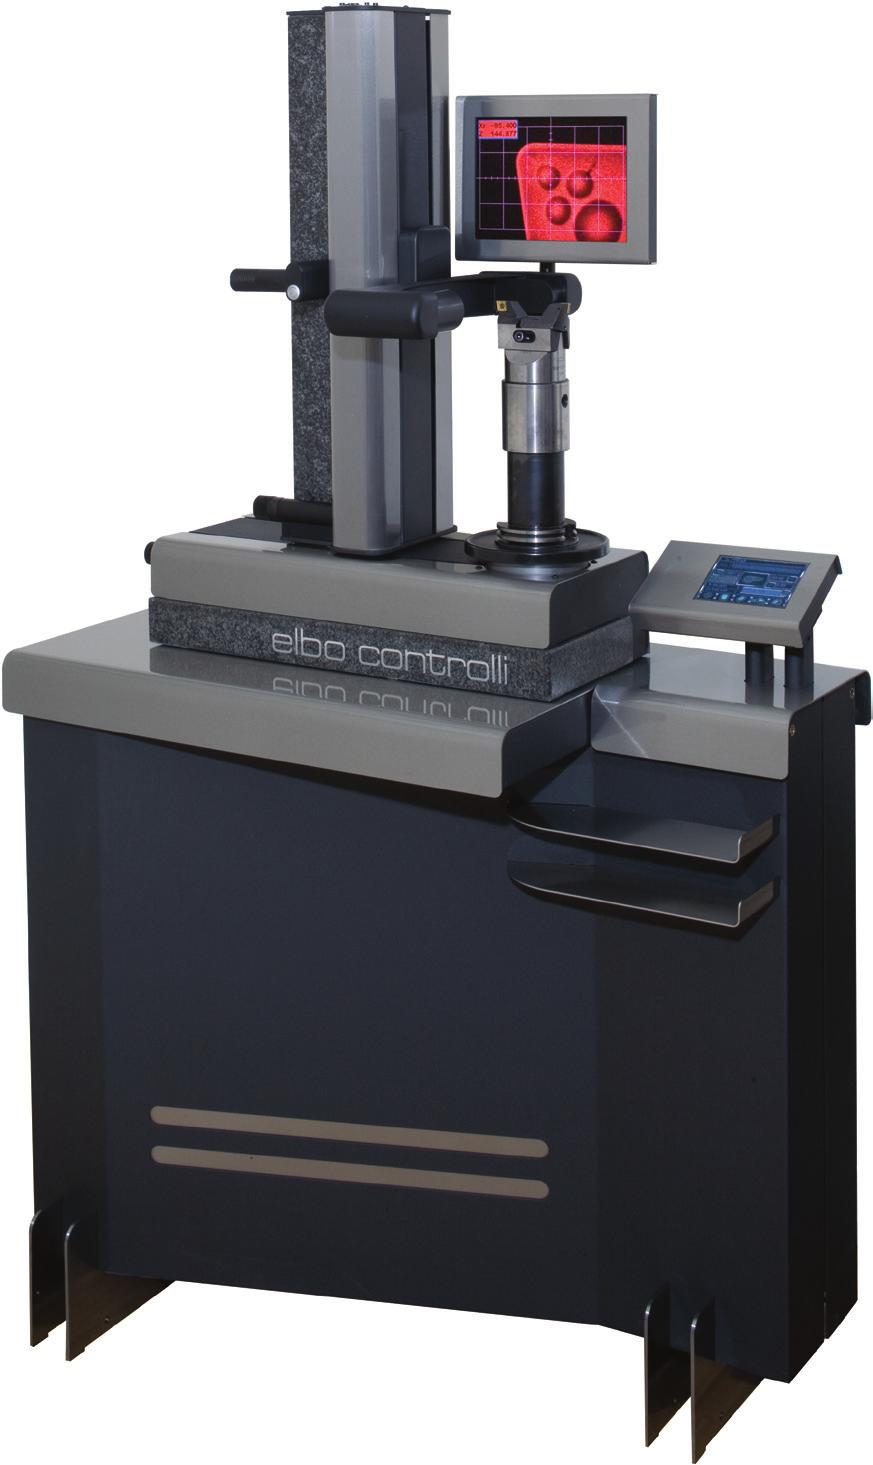 HATHOR - OVERVIEW Our new Hathor Tool Presetting machine has been developed as the second level option for our new generation of advanced tool presetting machines.